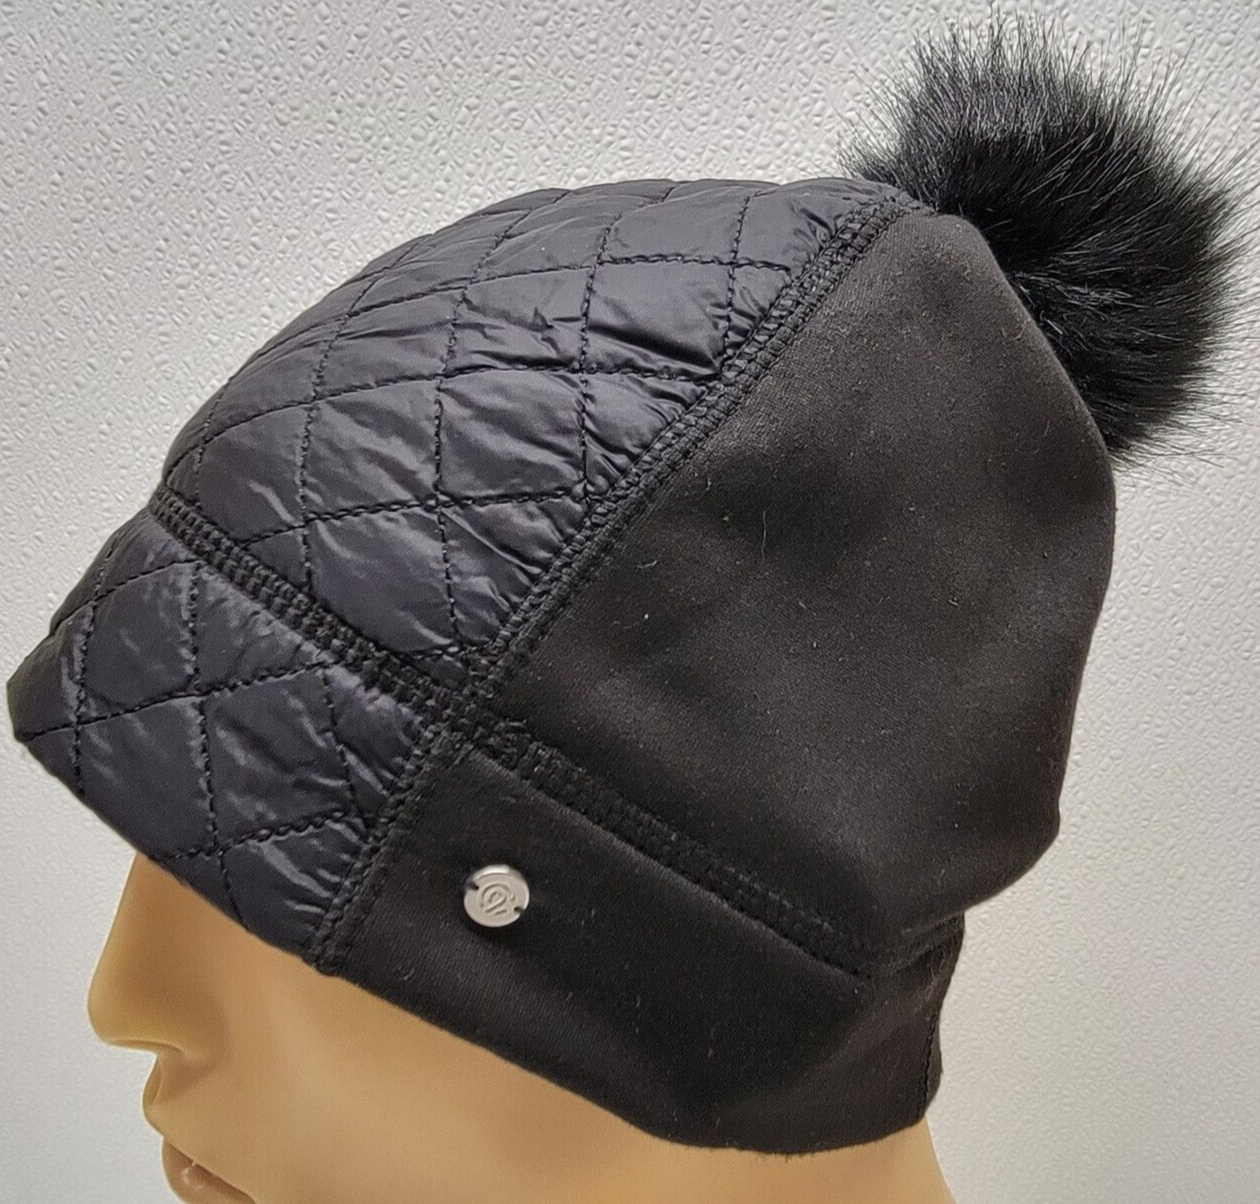 Primary image for Champion Womens Winter Hat Beanie Black Quilted Panel Fleece Faux Fur Pom 